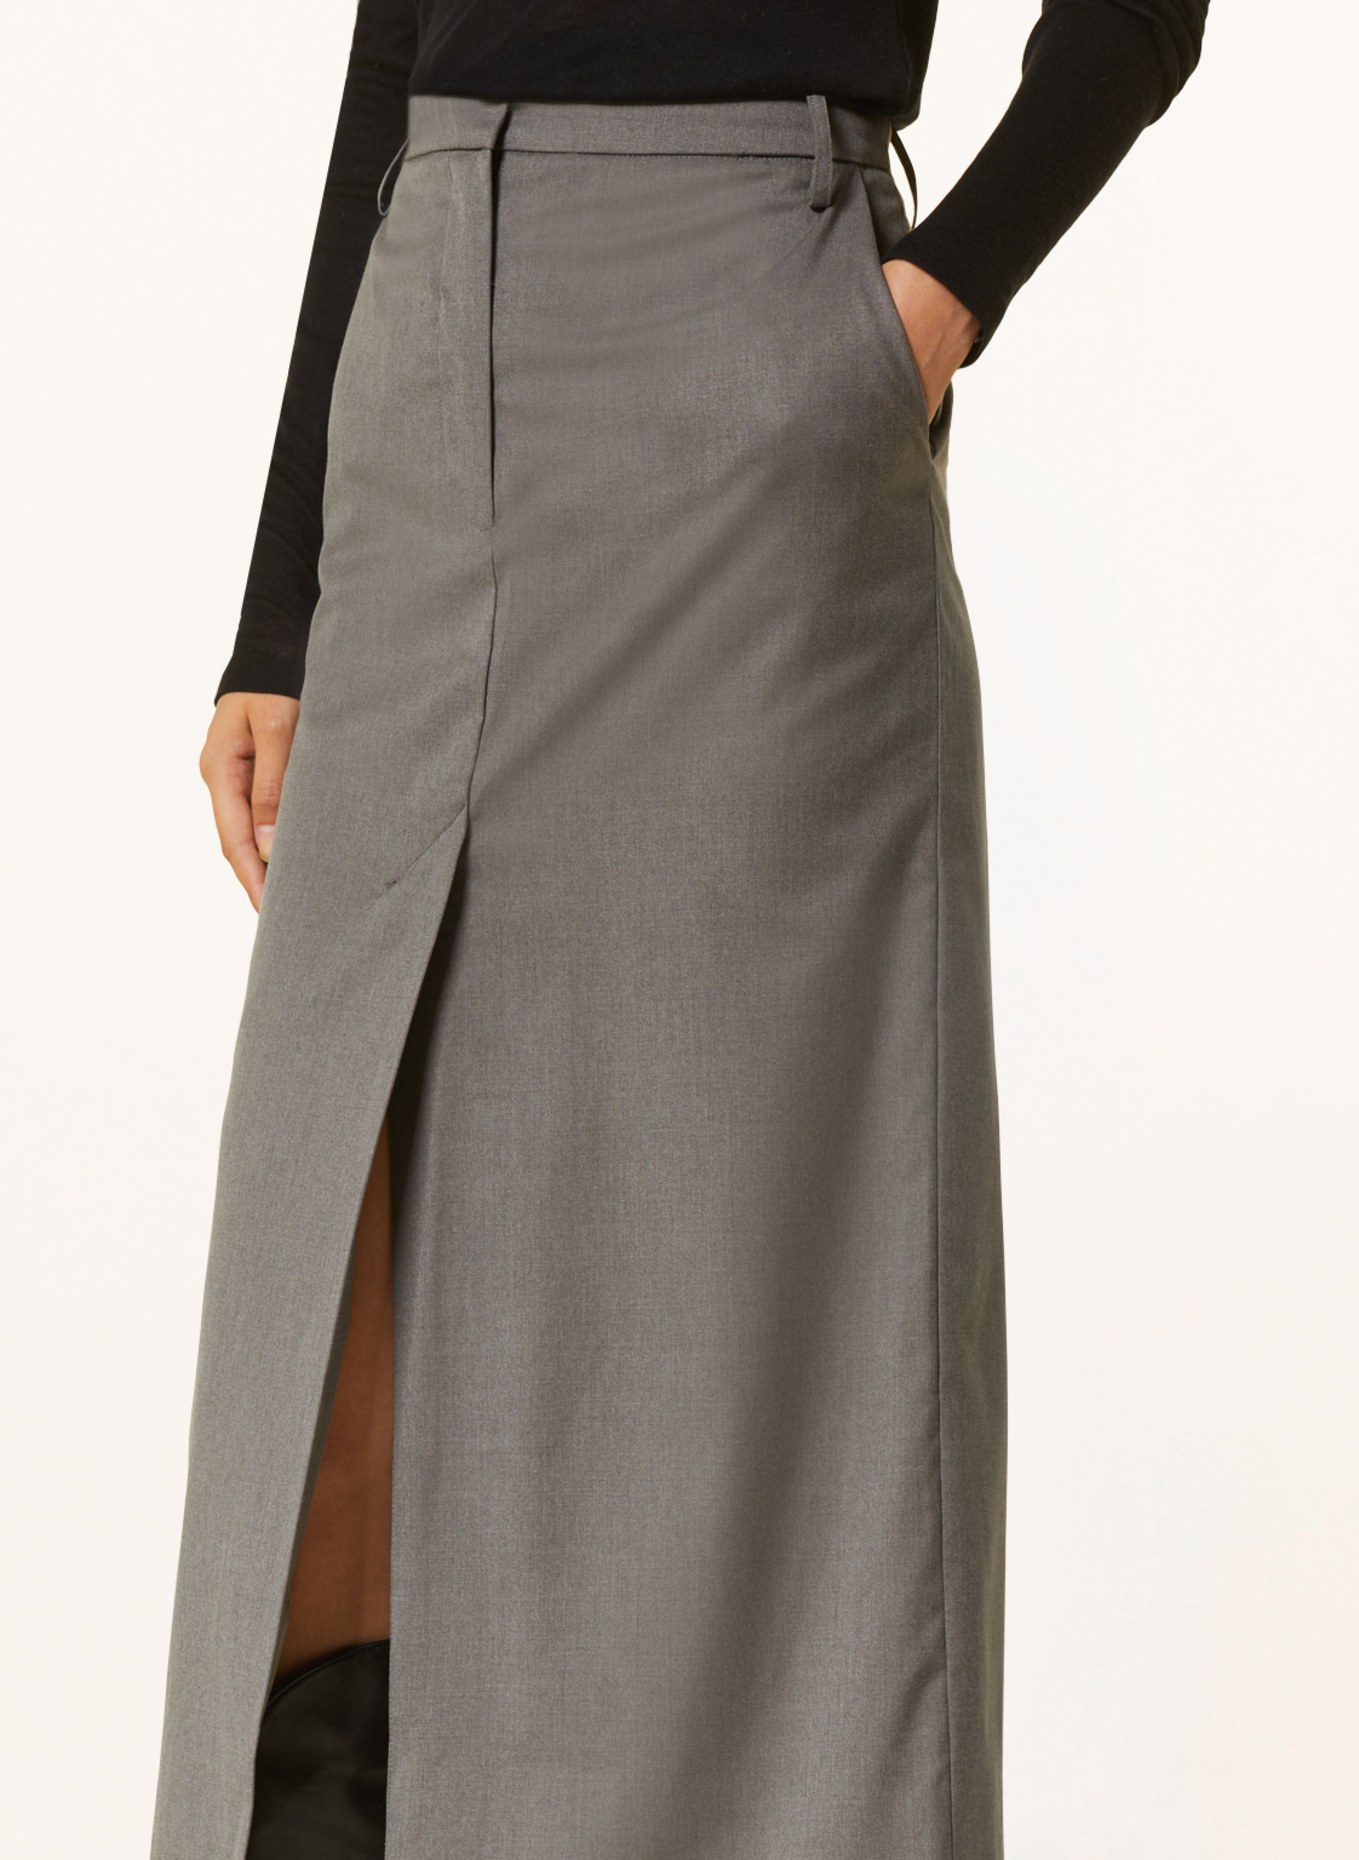 REMAIN Skirt, Color: GRAY (Image 4)